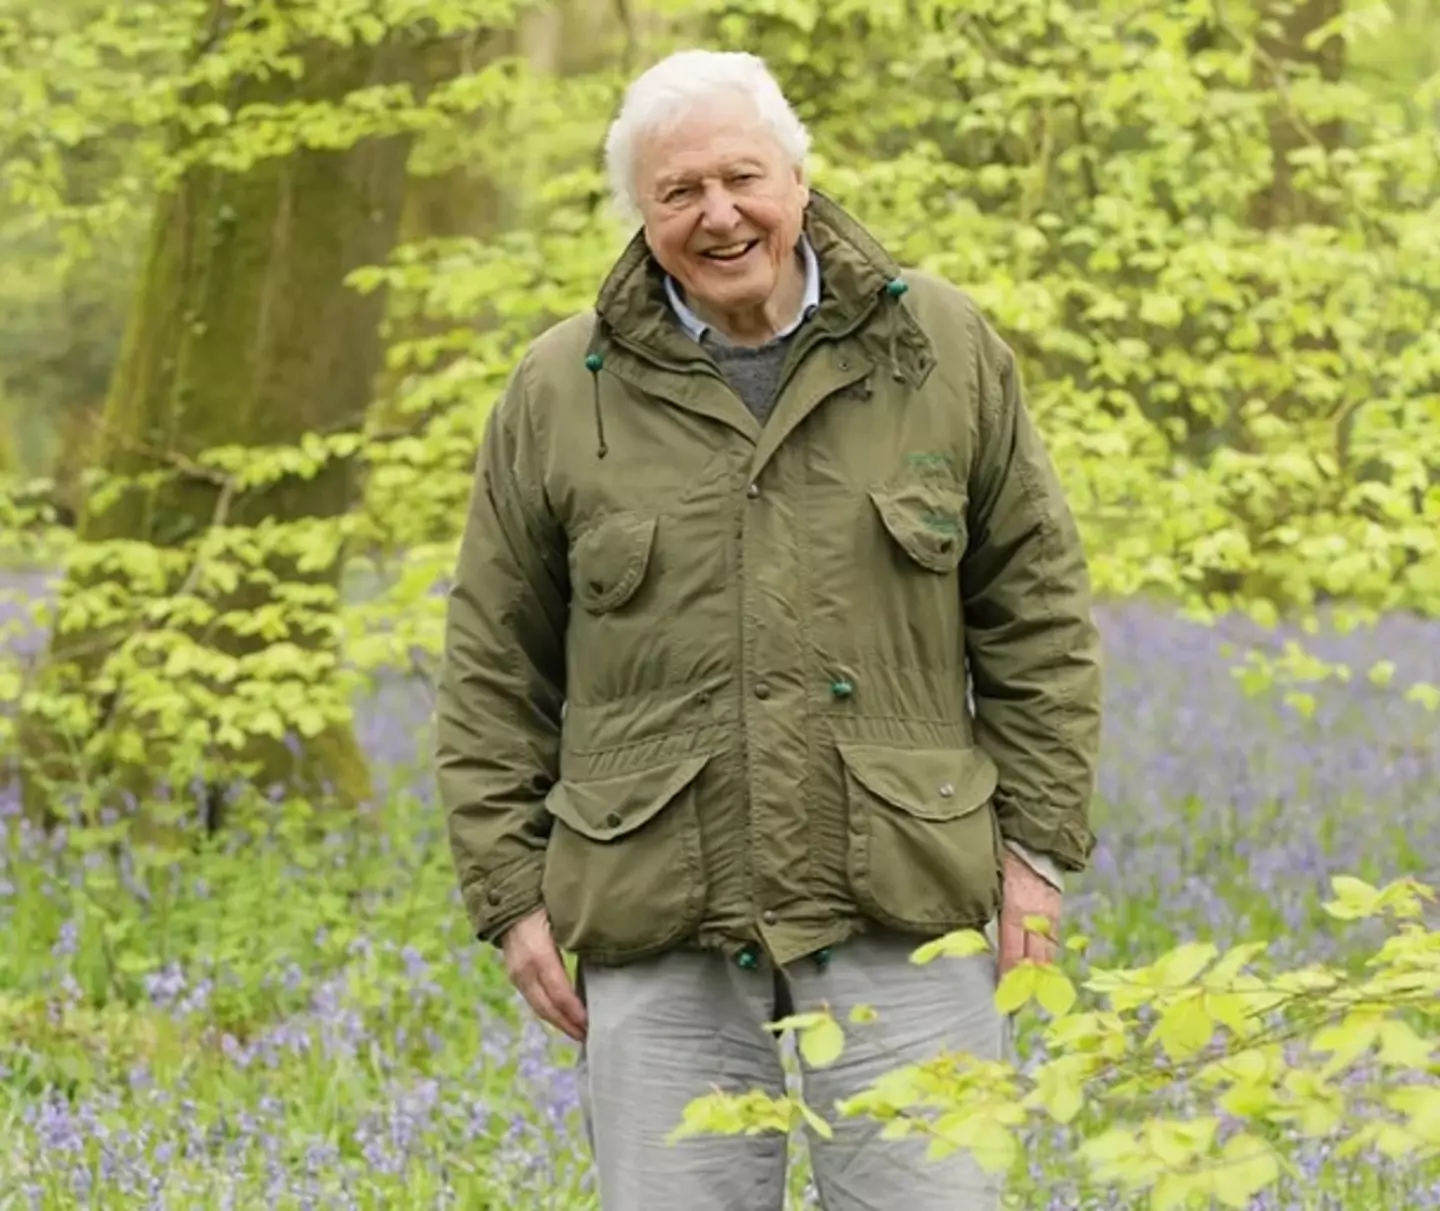 David Attenborough's new documentary is showing you what animals really sound like.